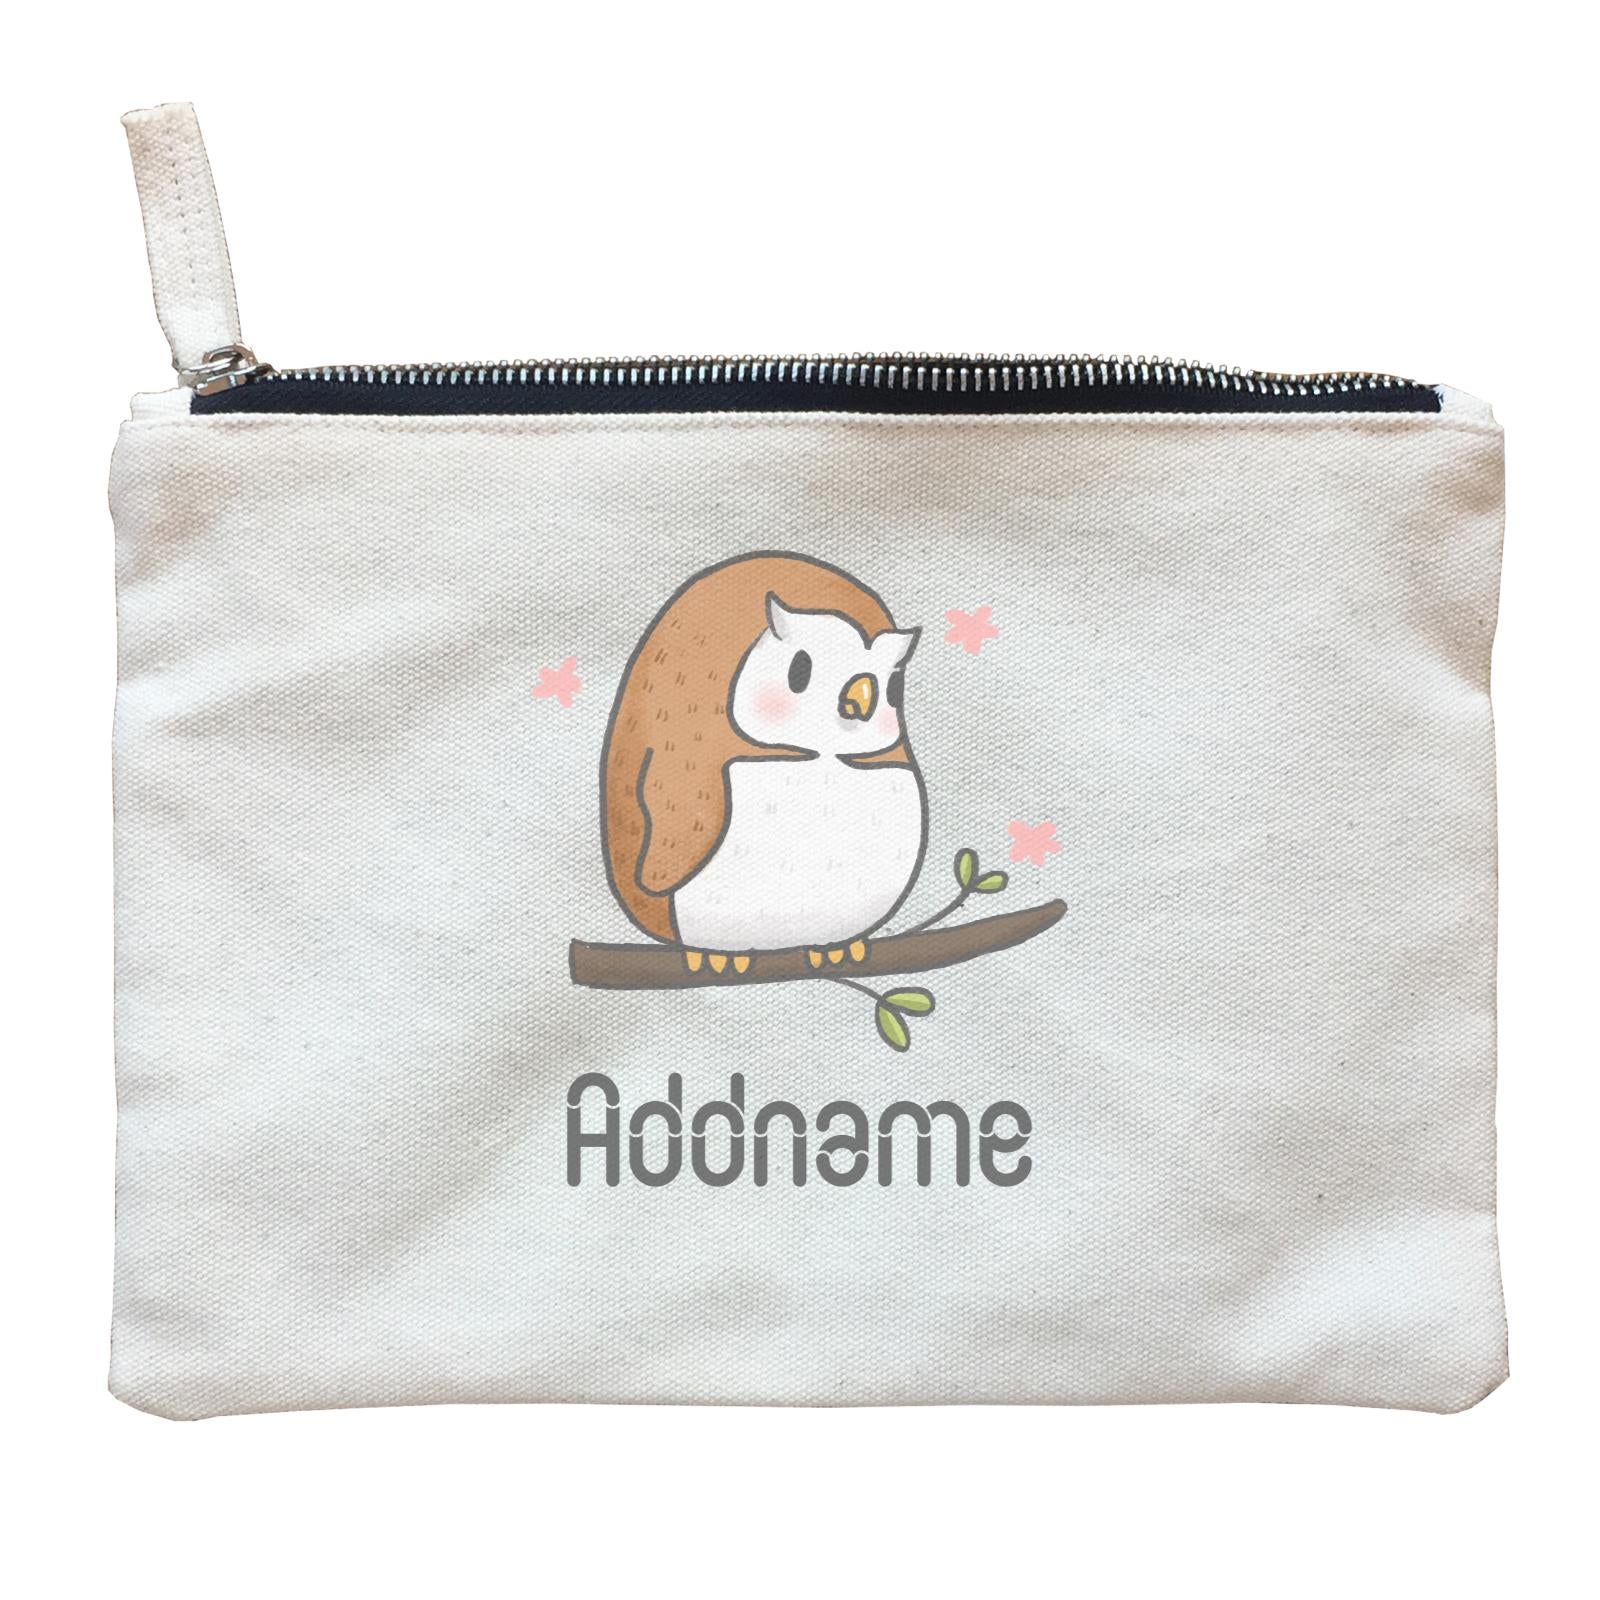 Cute Hand Drawn Style Owl Addname Zipper Pouch